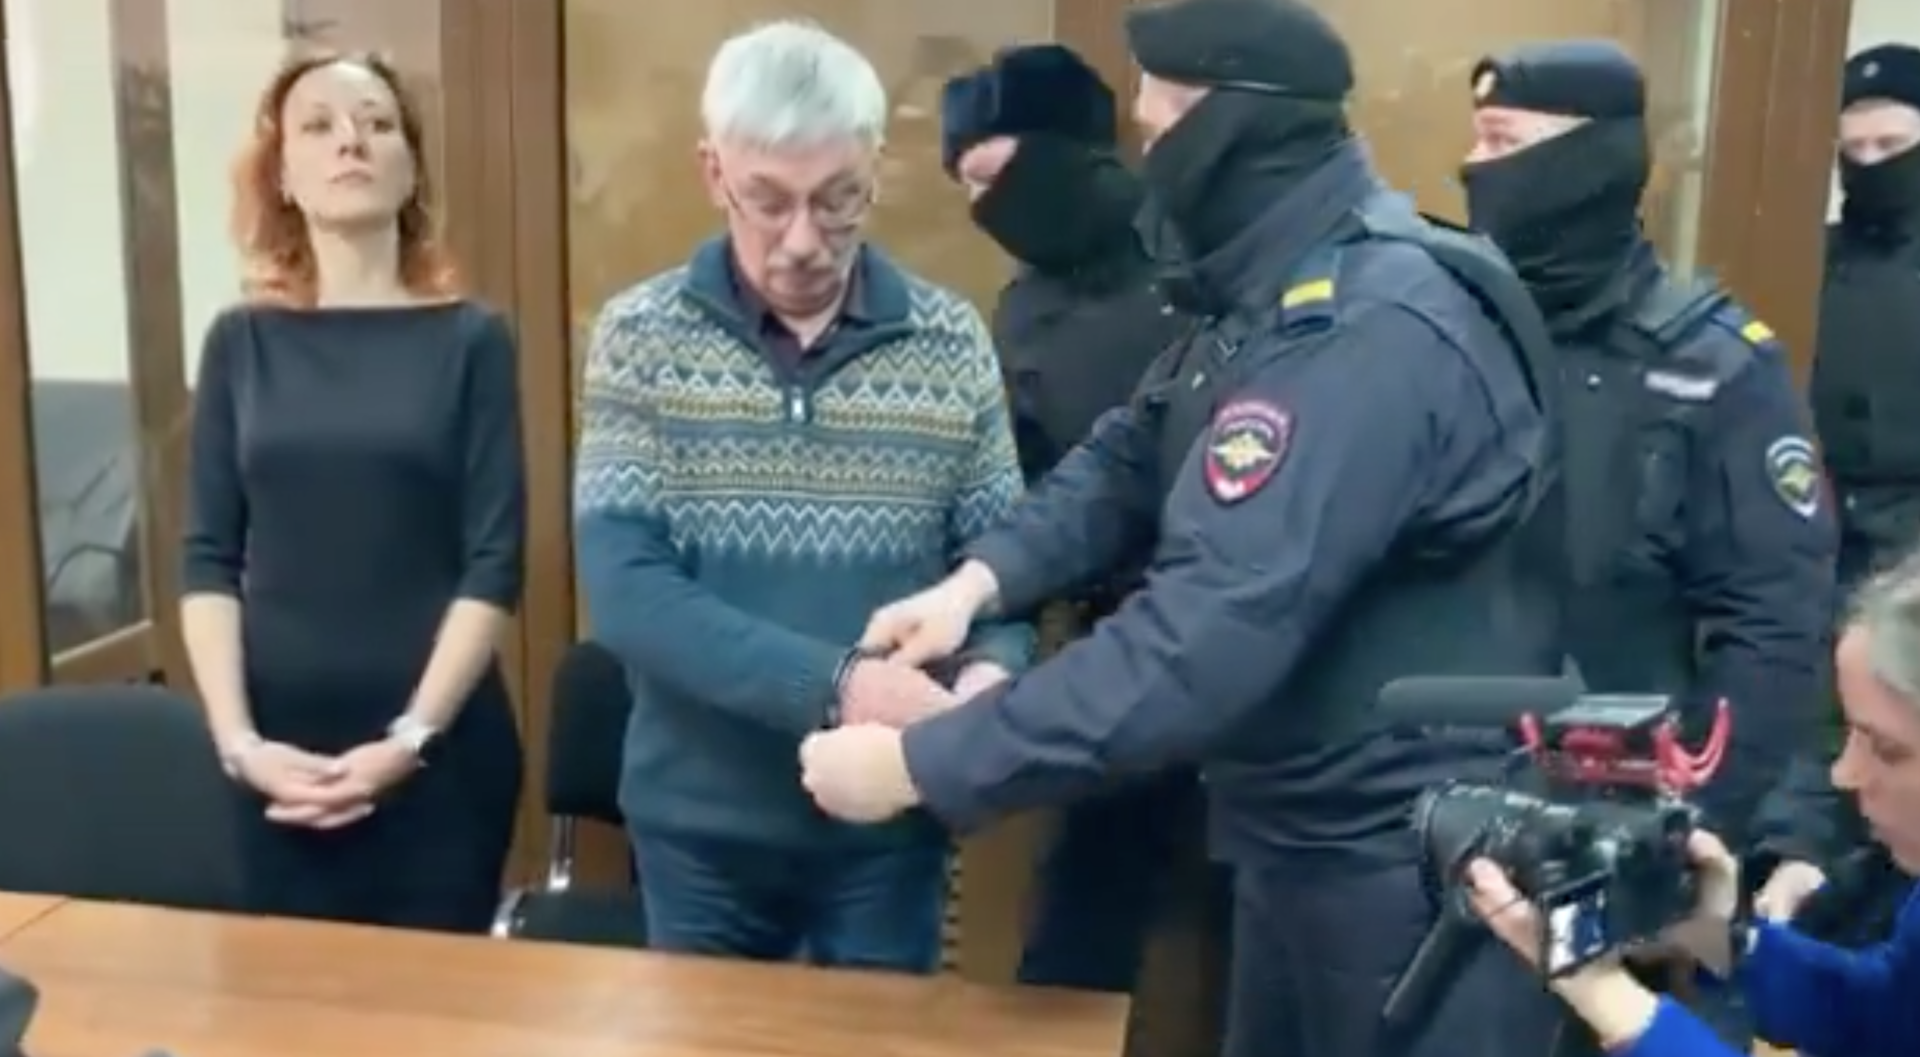 70-year-old Oleg Orlov, Soviet era dissident, co-chair of Memorial, hostage negotiator, and one of the most prominent human right defenders in Russia, is being taken from court, which sentenced him to 2.5 years in prison for "discrediting" the Russian army. Video: Mediazona